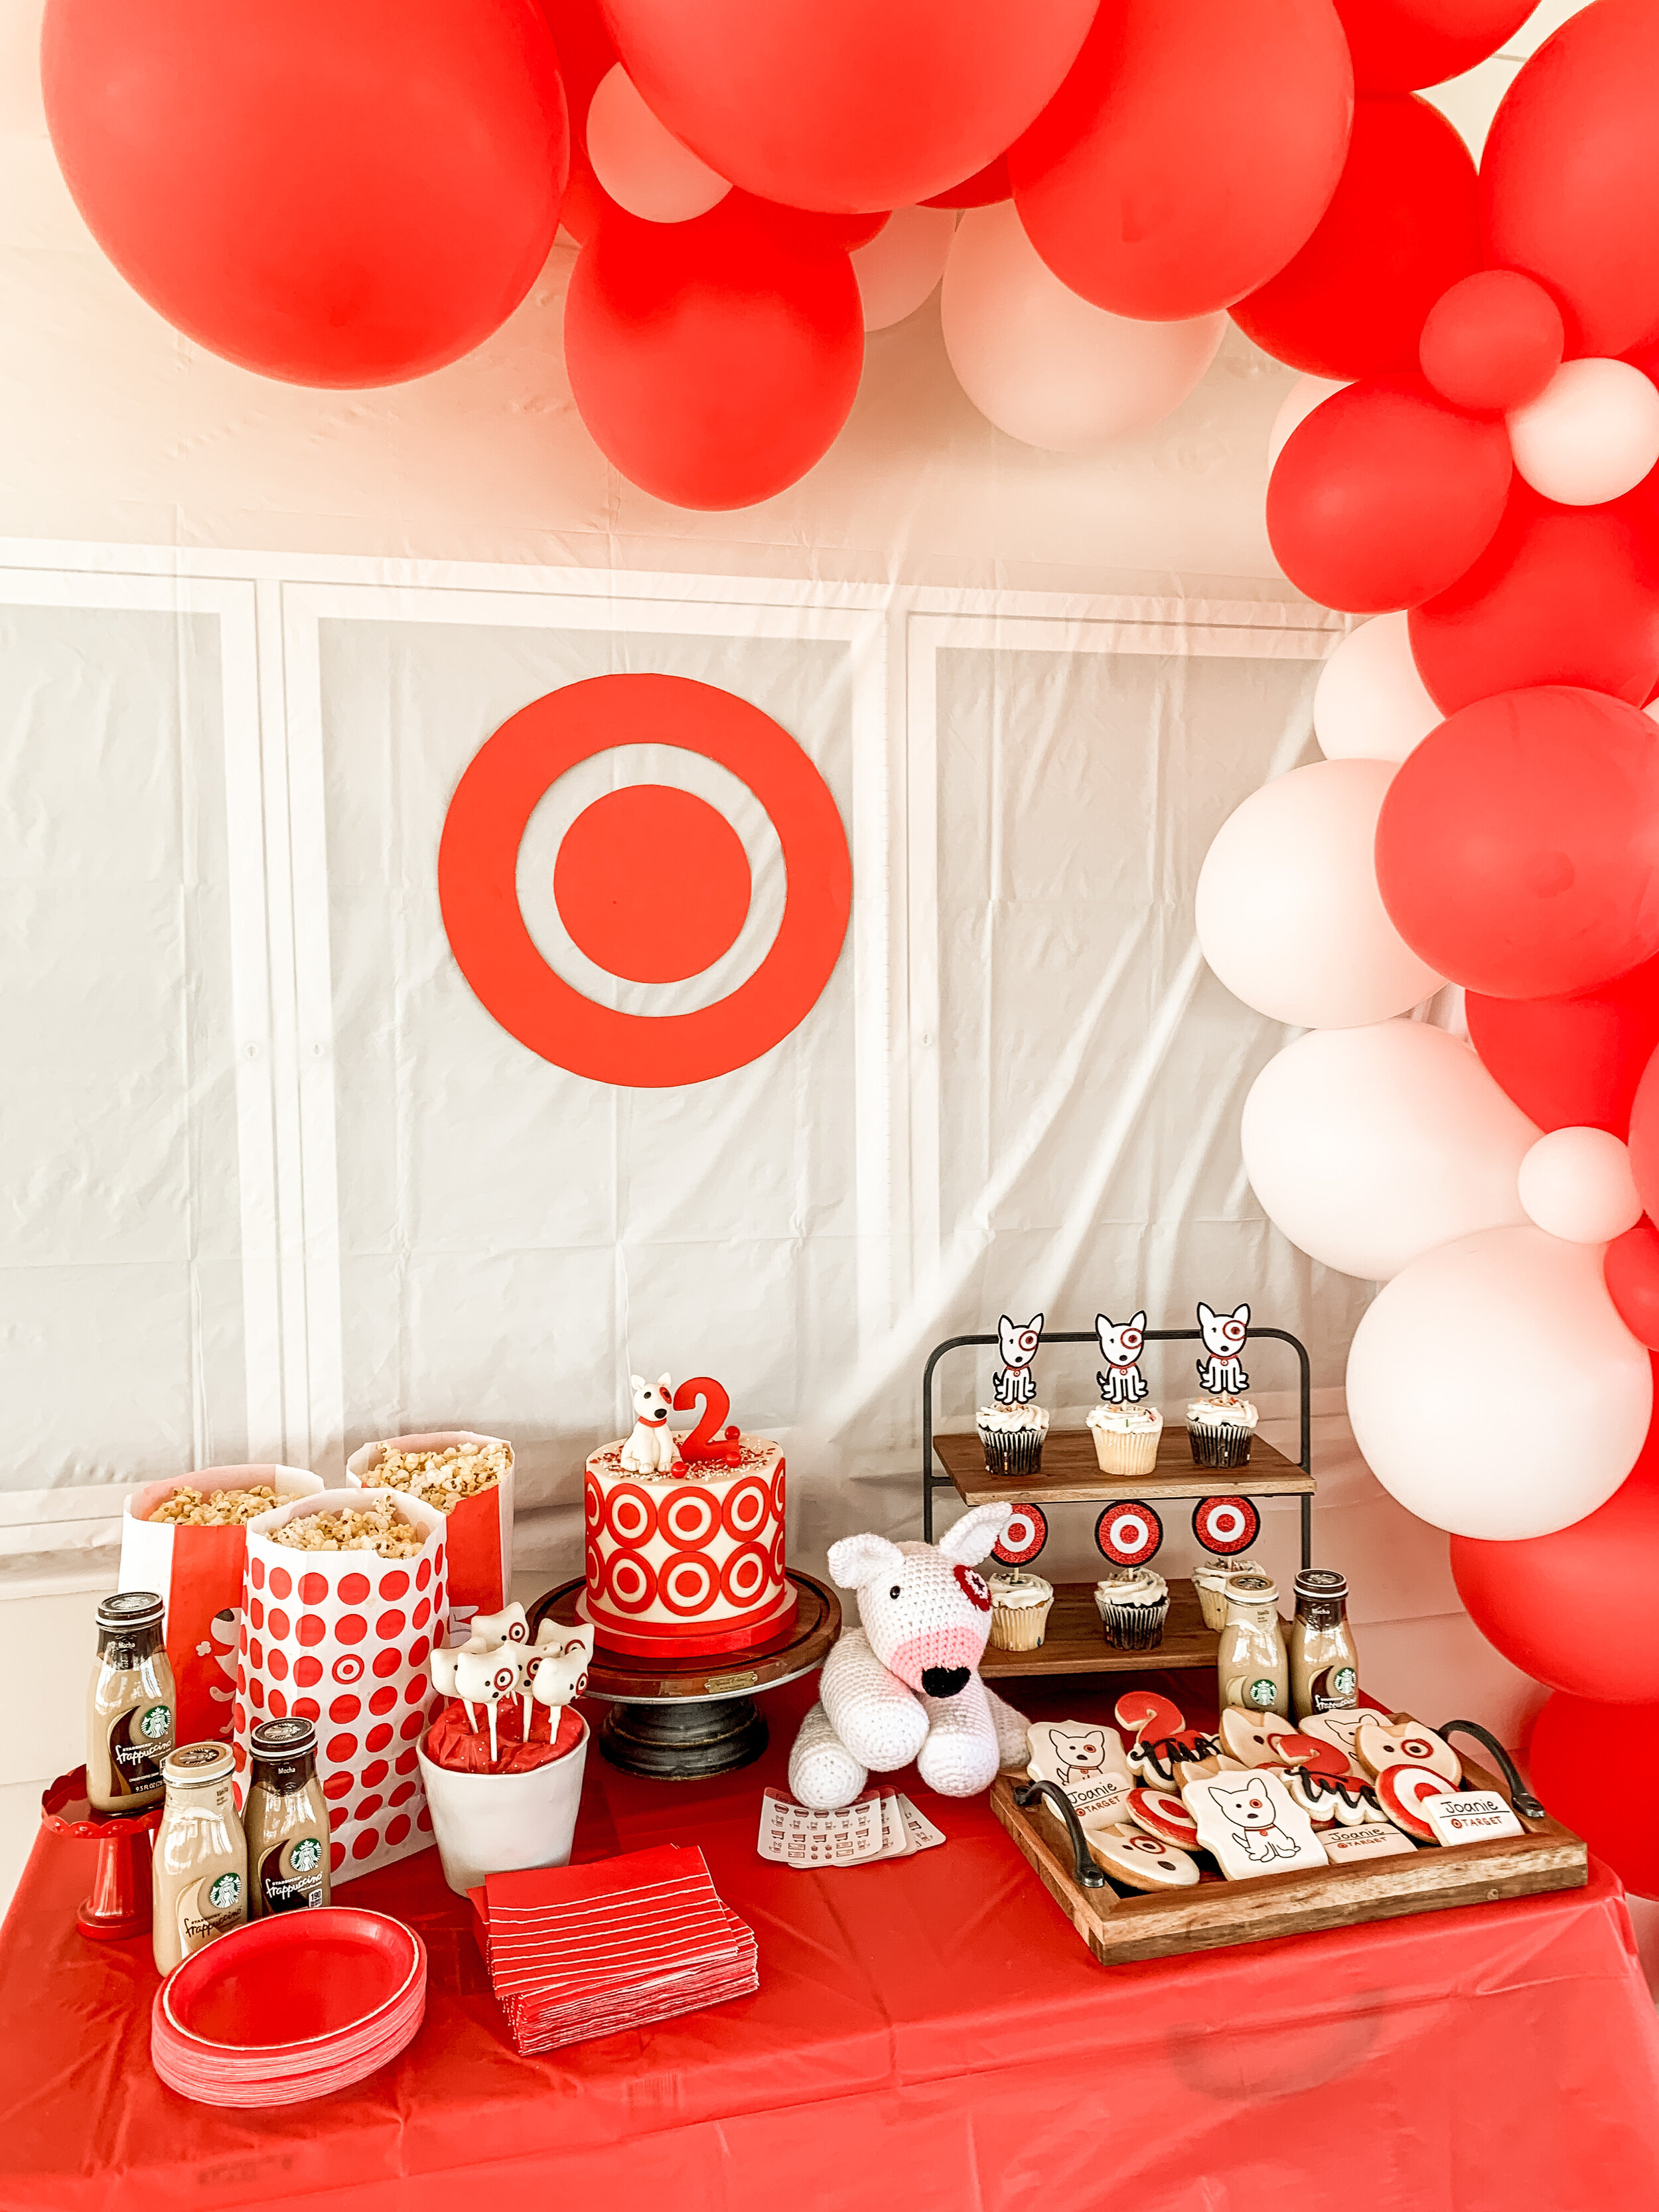 Joanie's Target themed 2nd Birthday Party — Home With Joanie